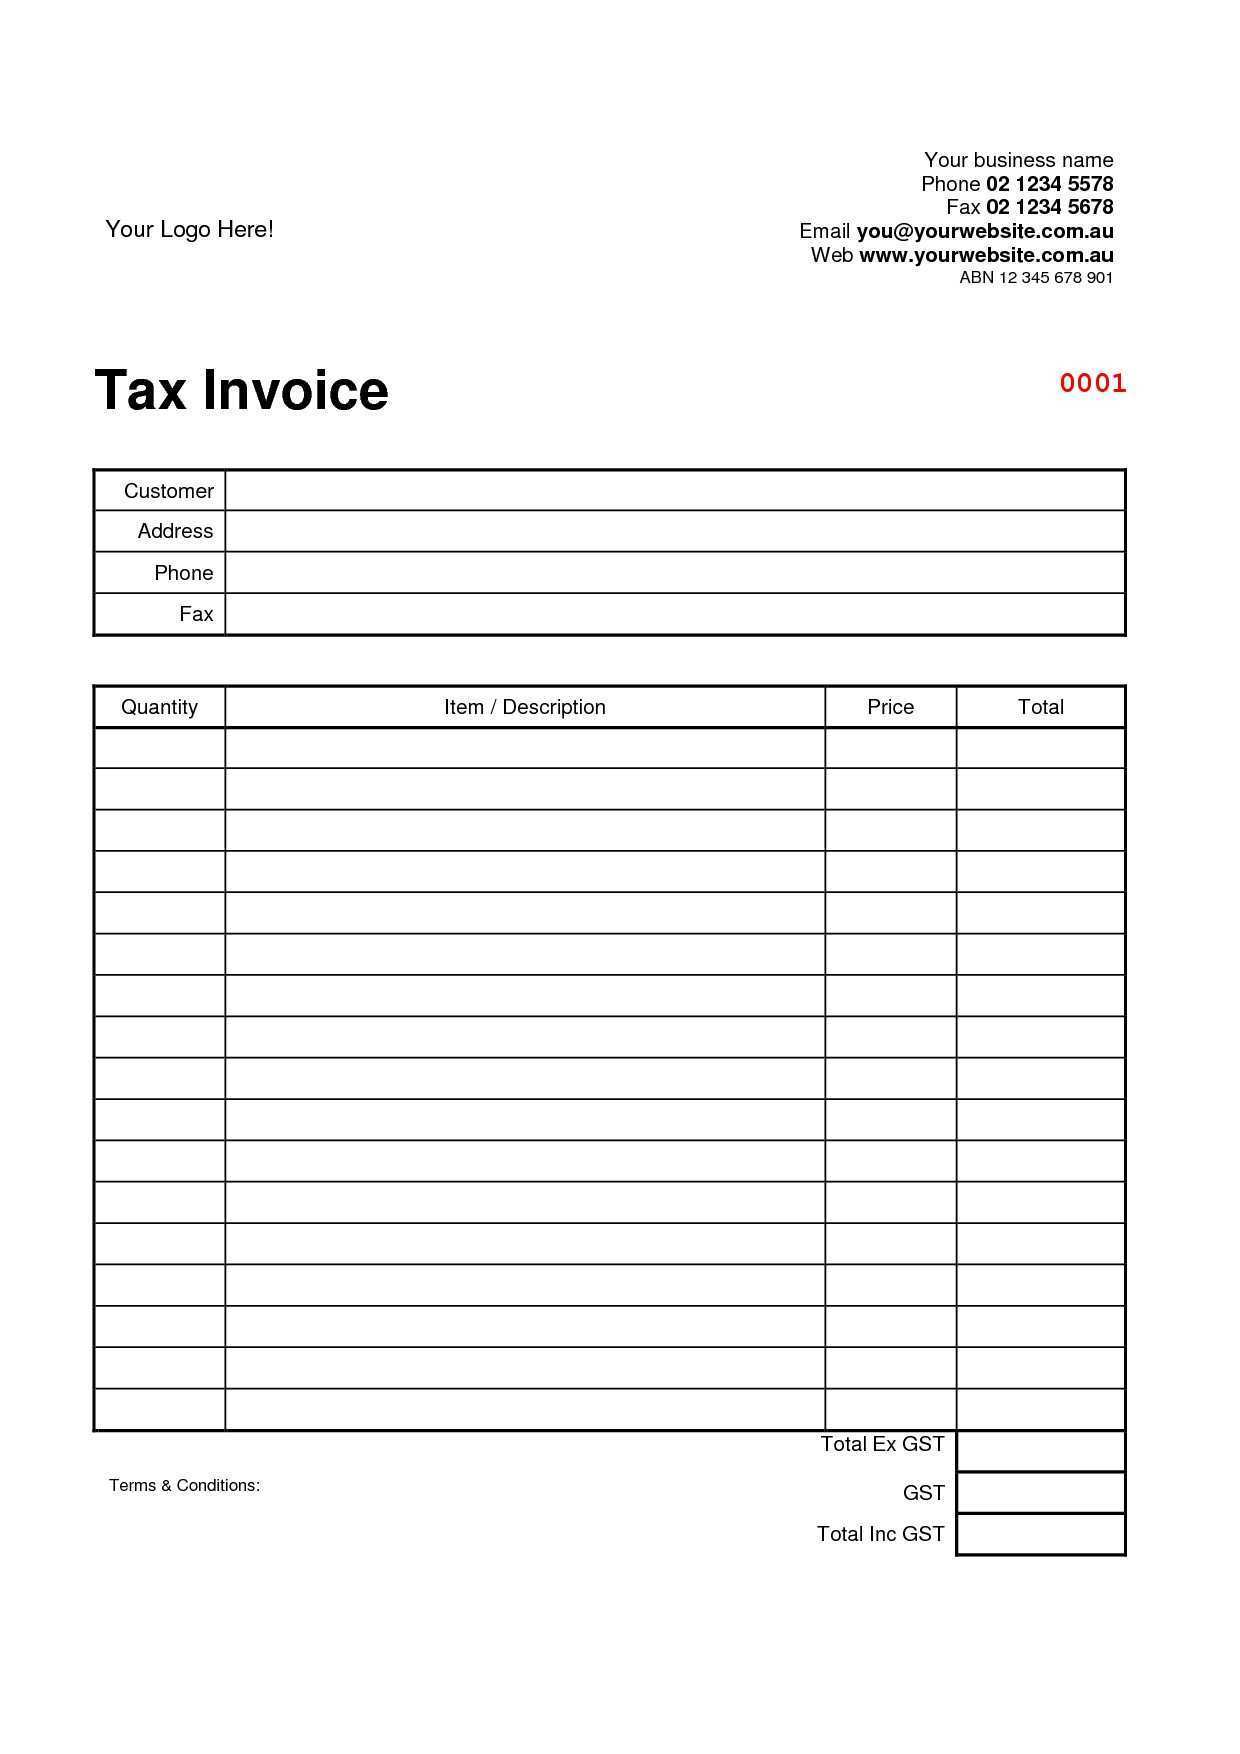 93 Standard Blank Invoice Format With Gst Download with Blank Invoice Format With Gst